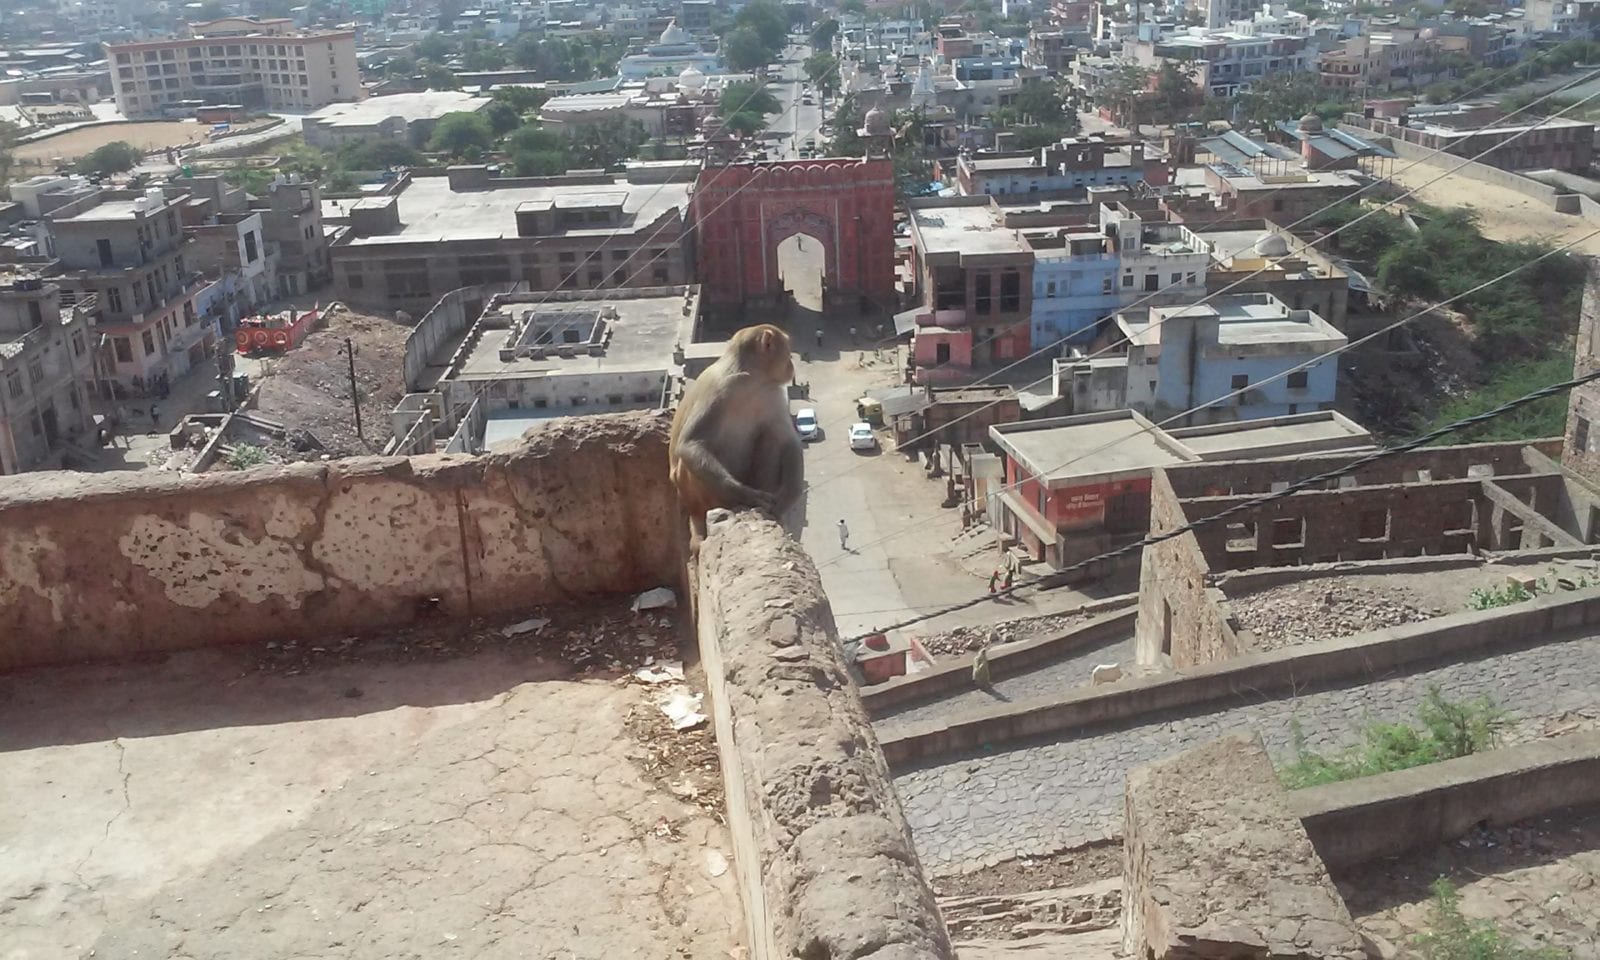 Backpacking in Rajasthan - Monkey temple